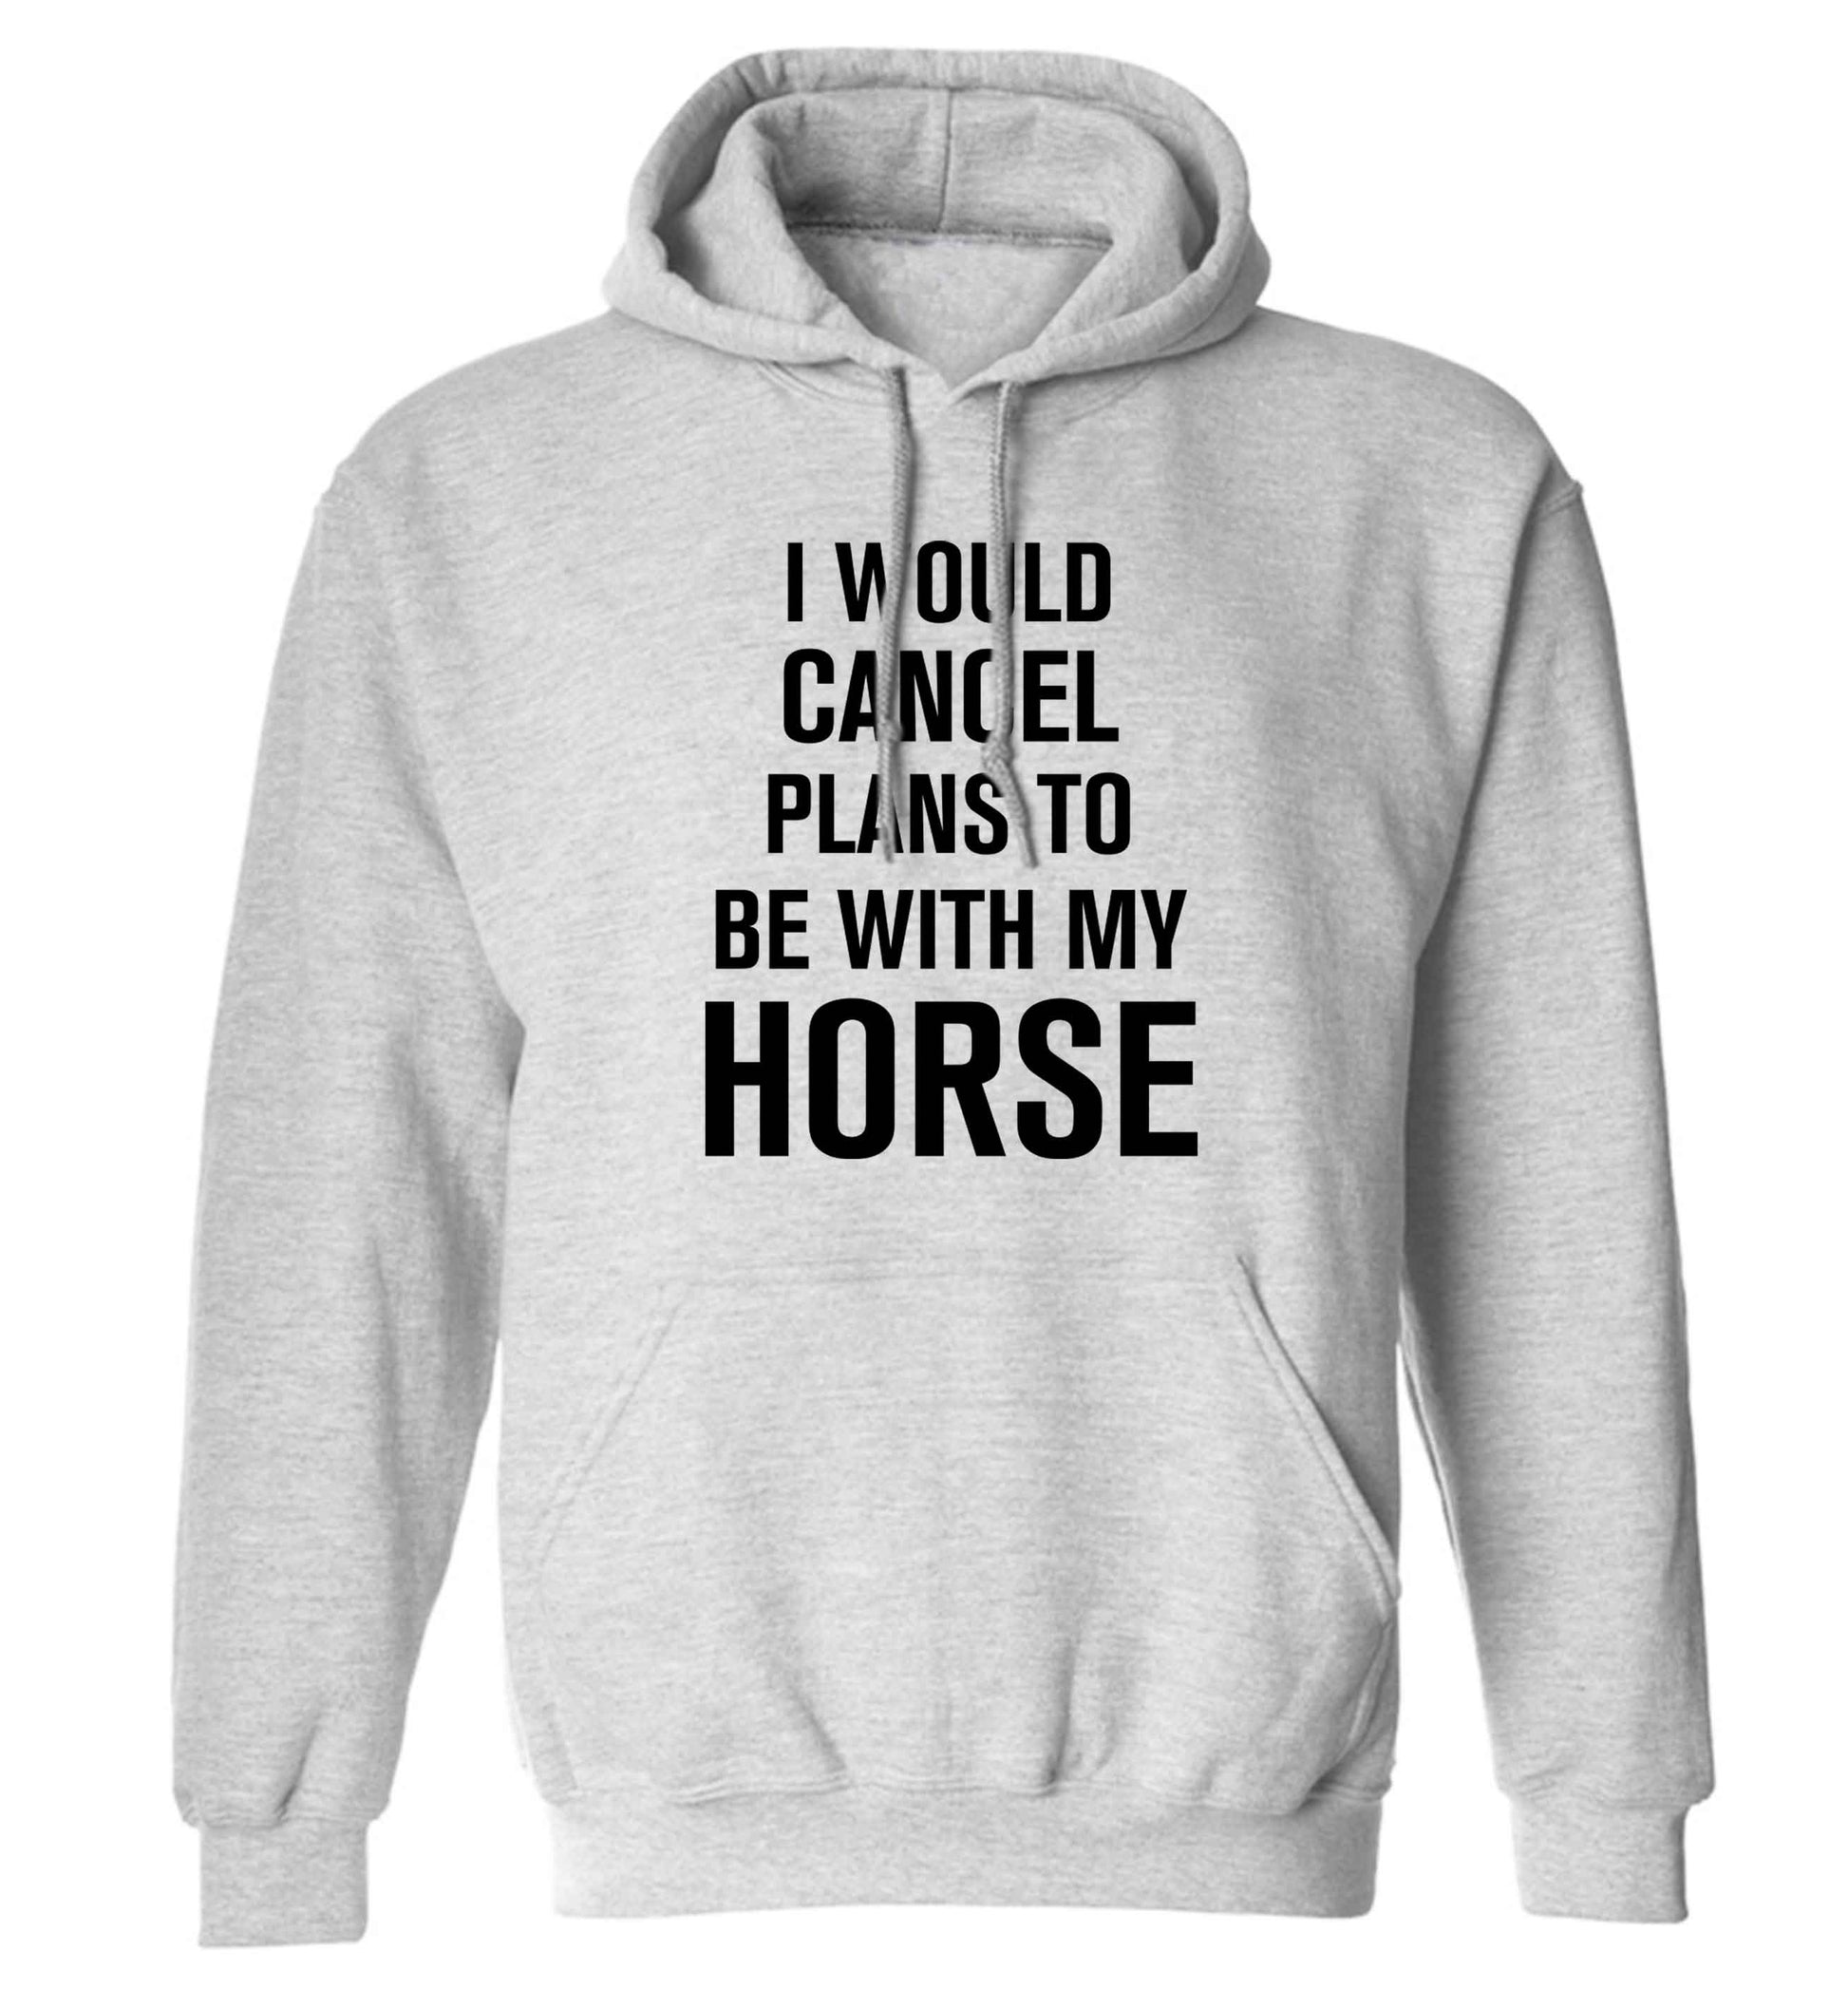 I will cancel plans to be with my horse adults unisex grey hoodie 2XL